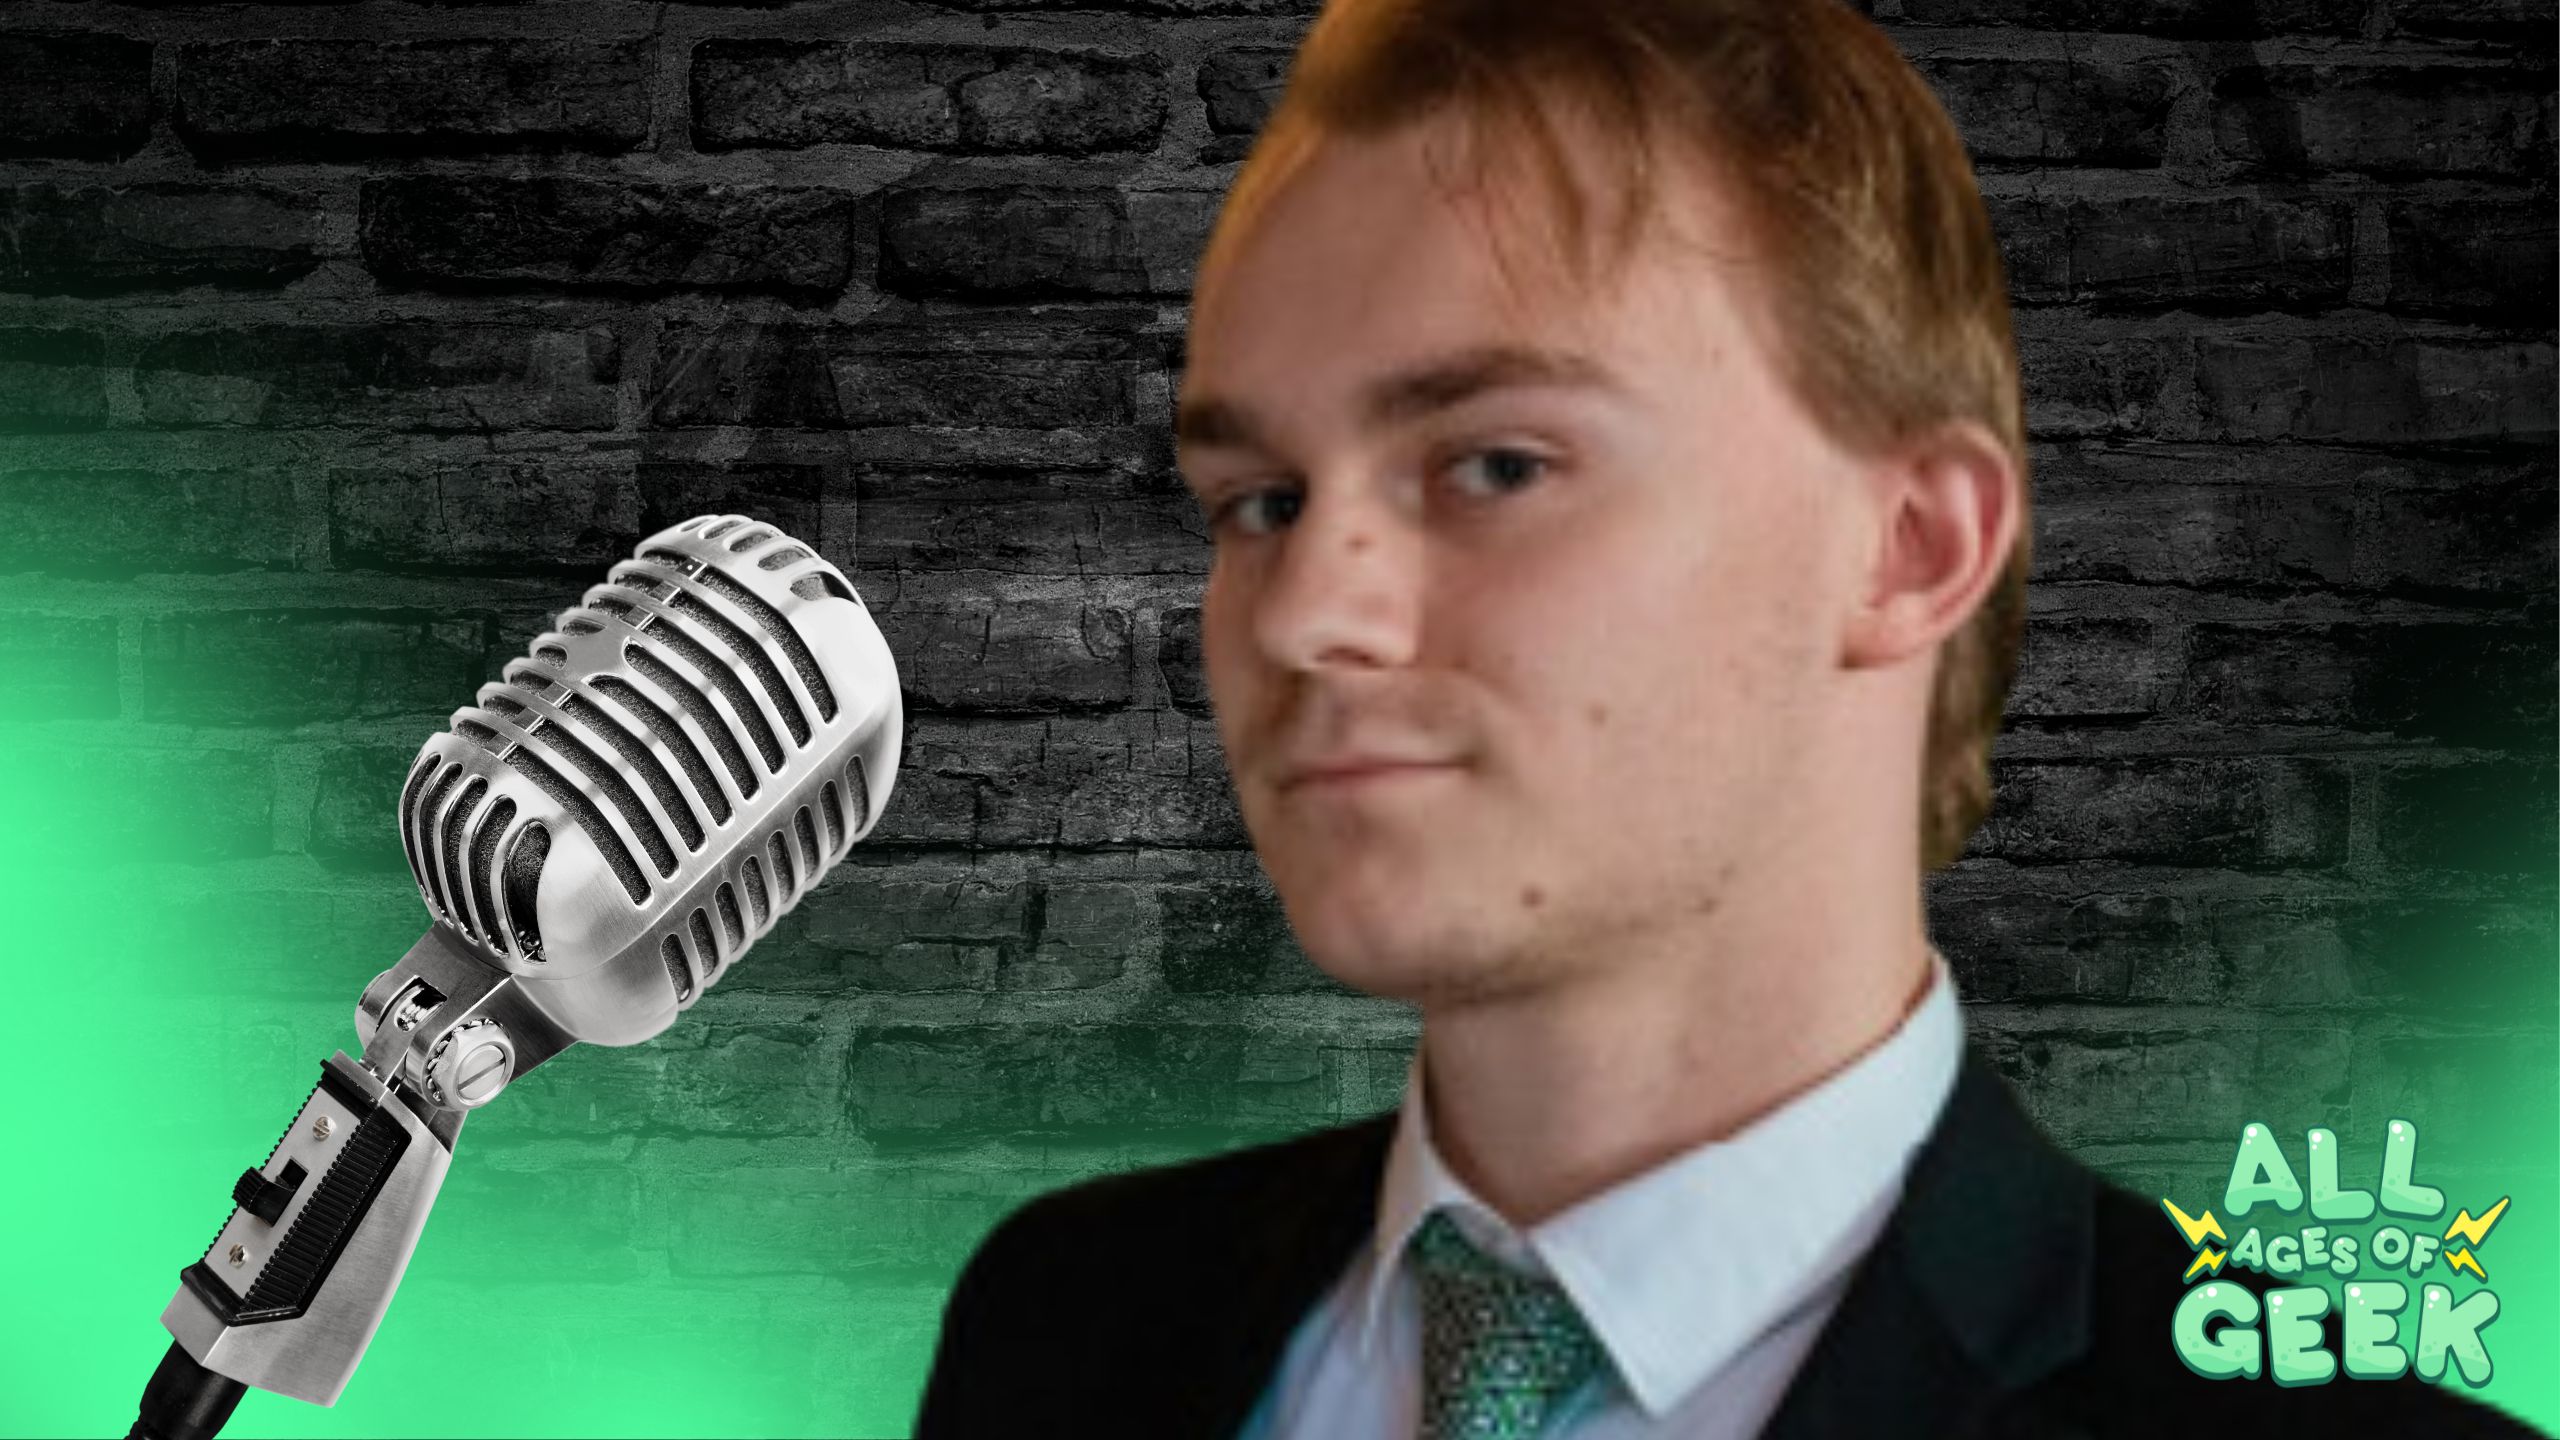 A person wearing a suit and tie is standing next to a vintage-style microphone. The background features a dark brick wall with a gradient green glow at the bottom. The All Ages of Geek logo is visible in the bottom right corner.